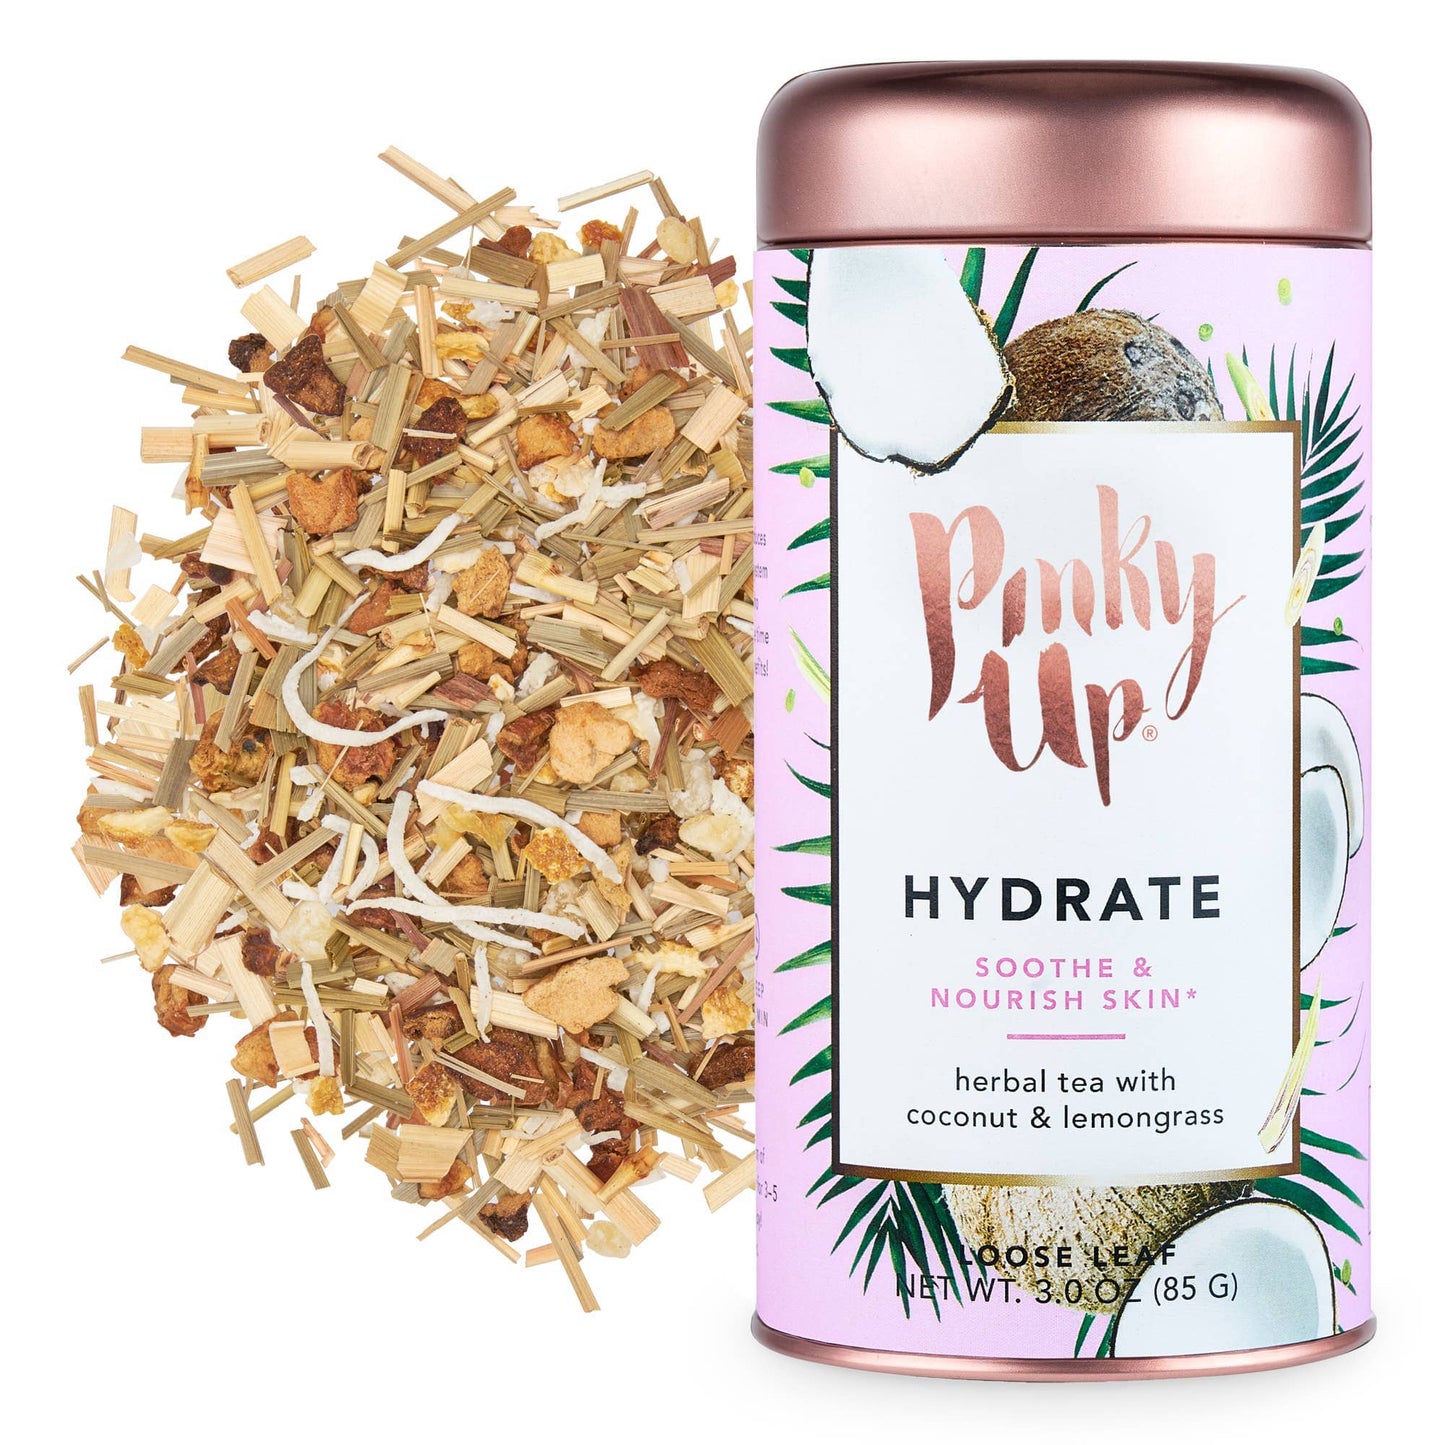 Hydrate Loose Leaf Tea by Pinky Up®